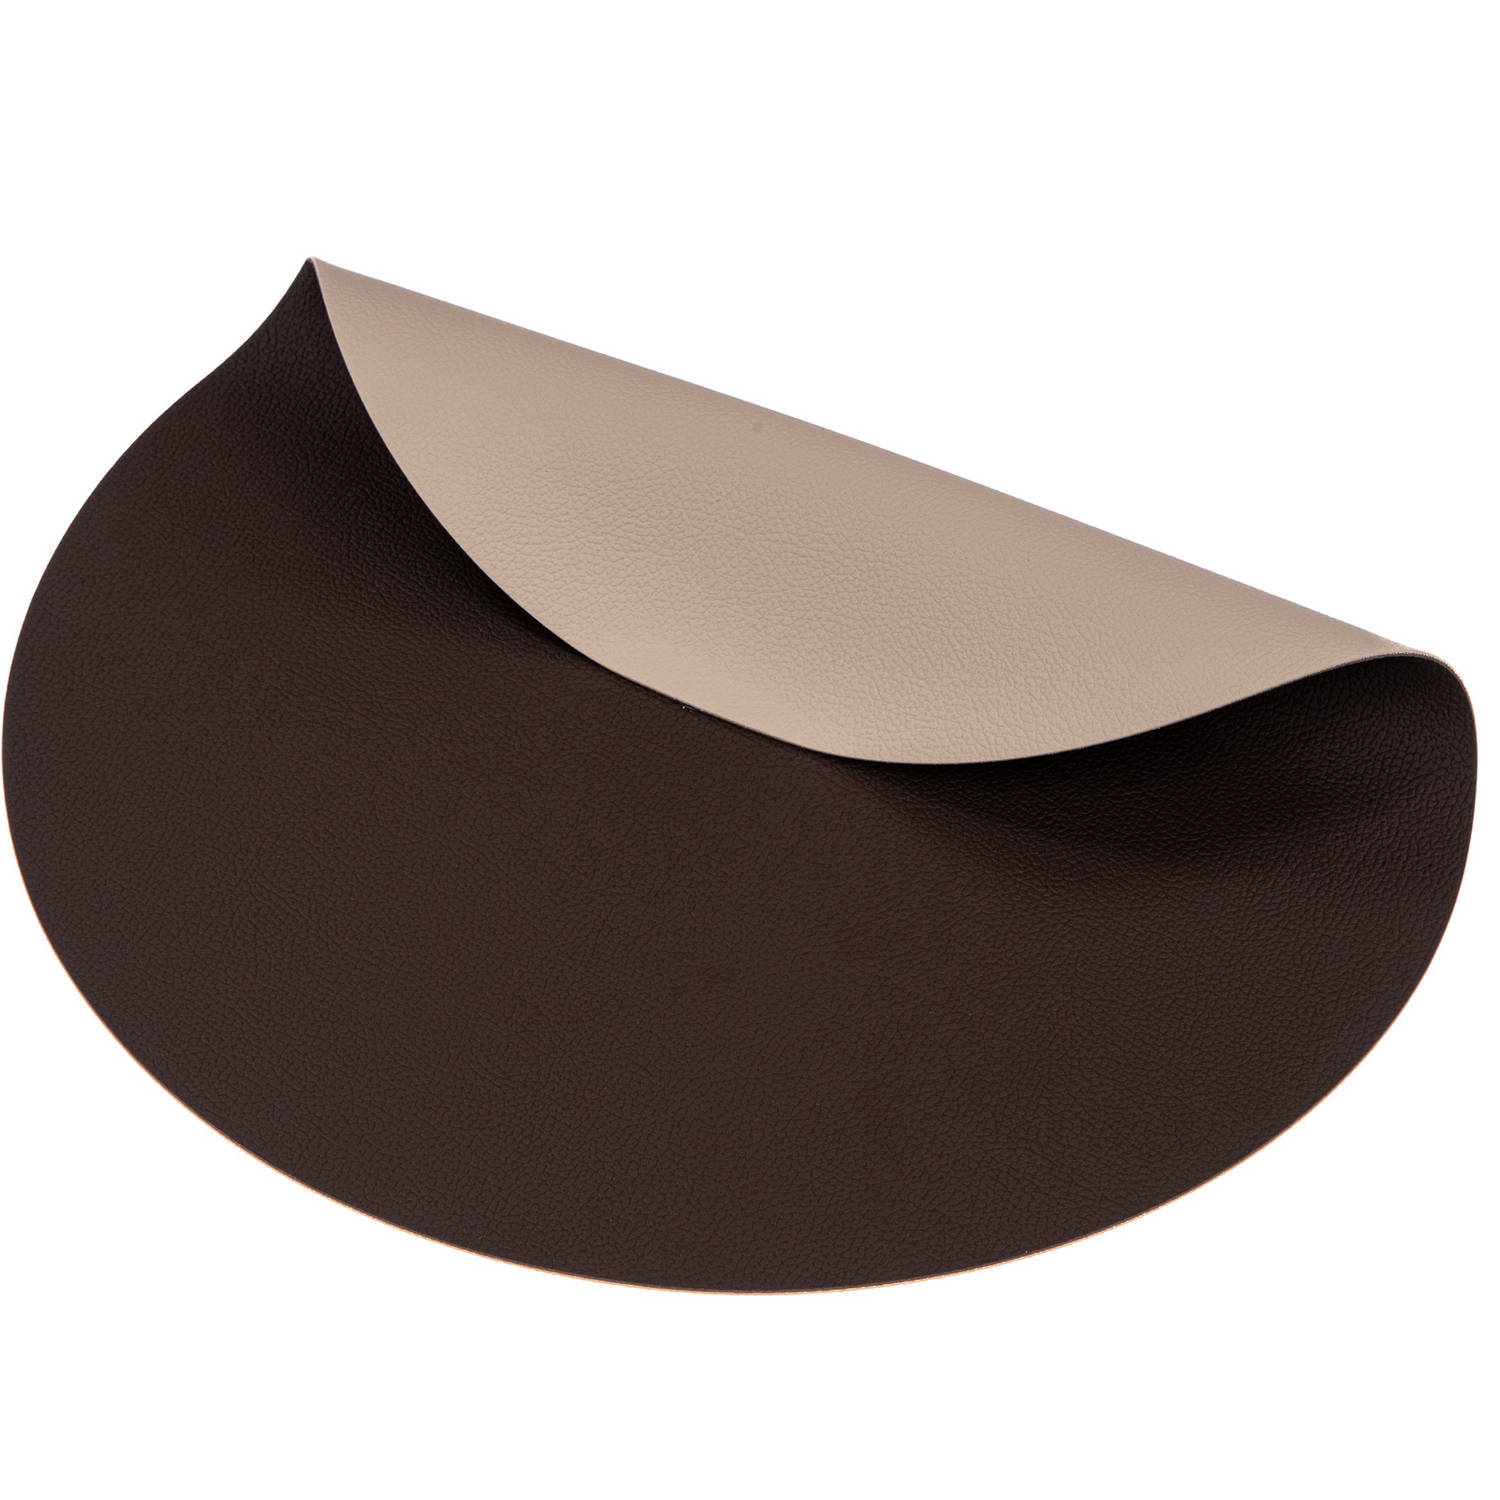 Jay Hill Placemat Rond Leer Bruin Zand ∅ 38 cm